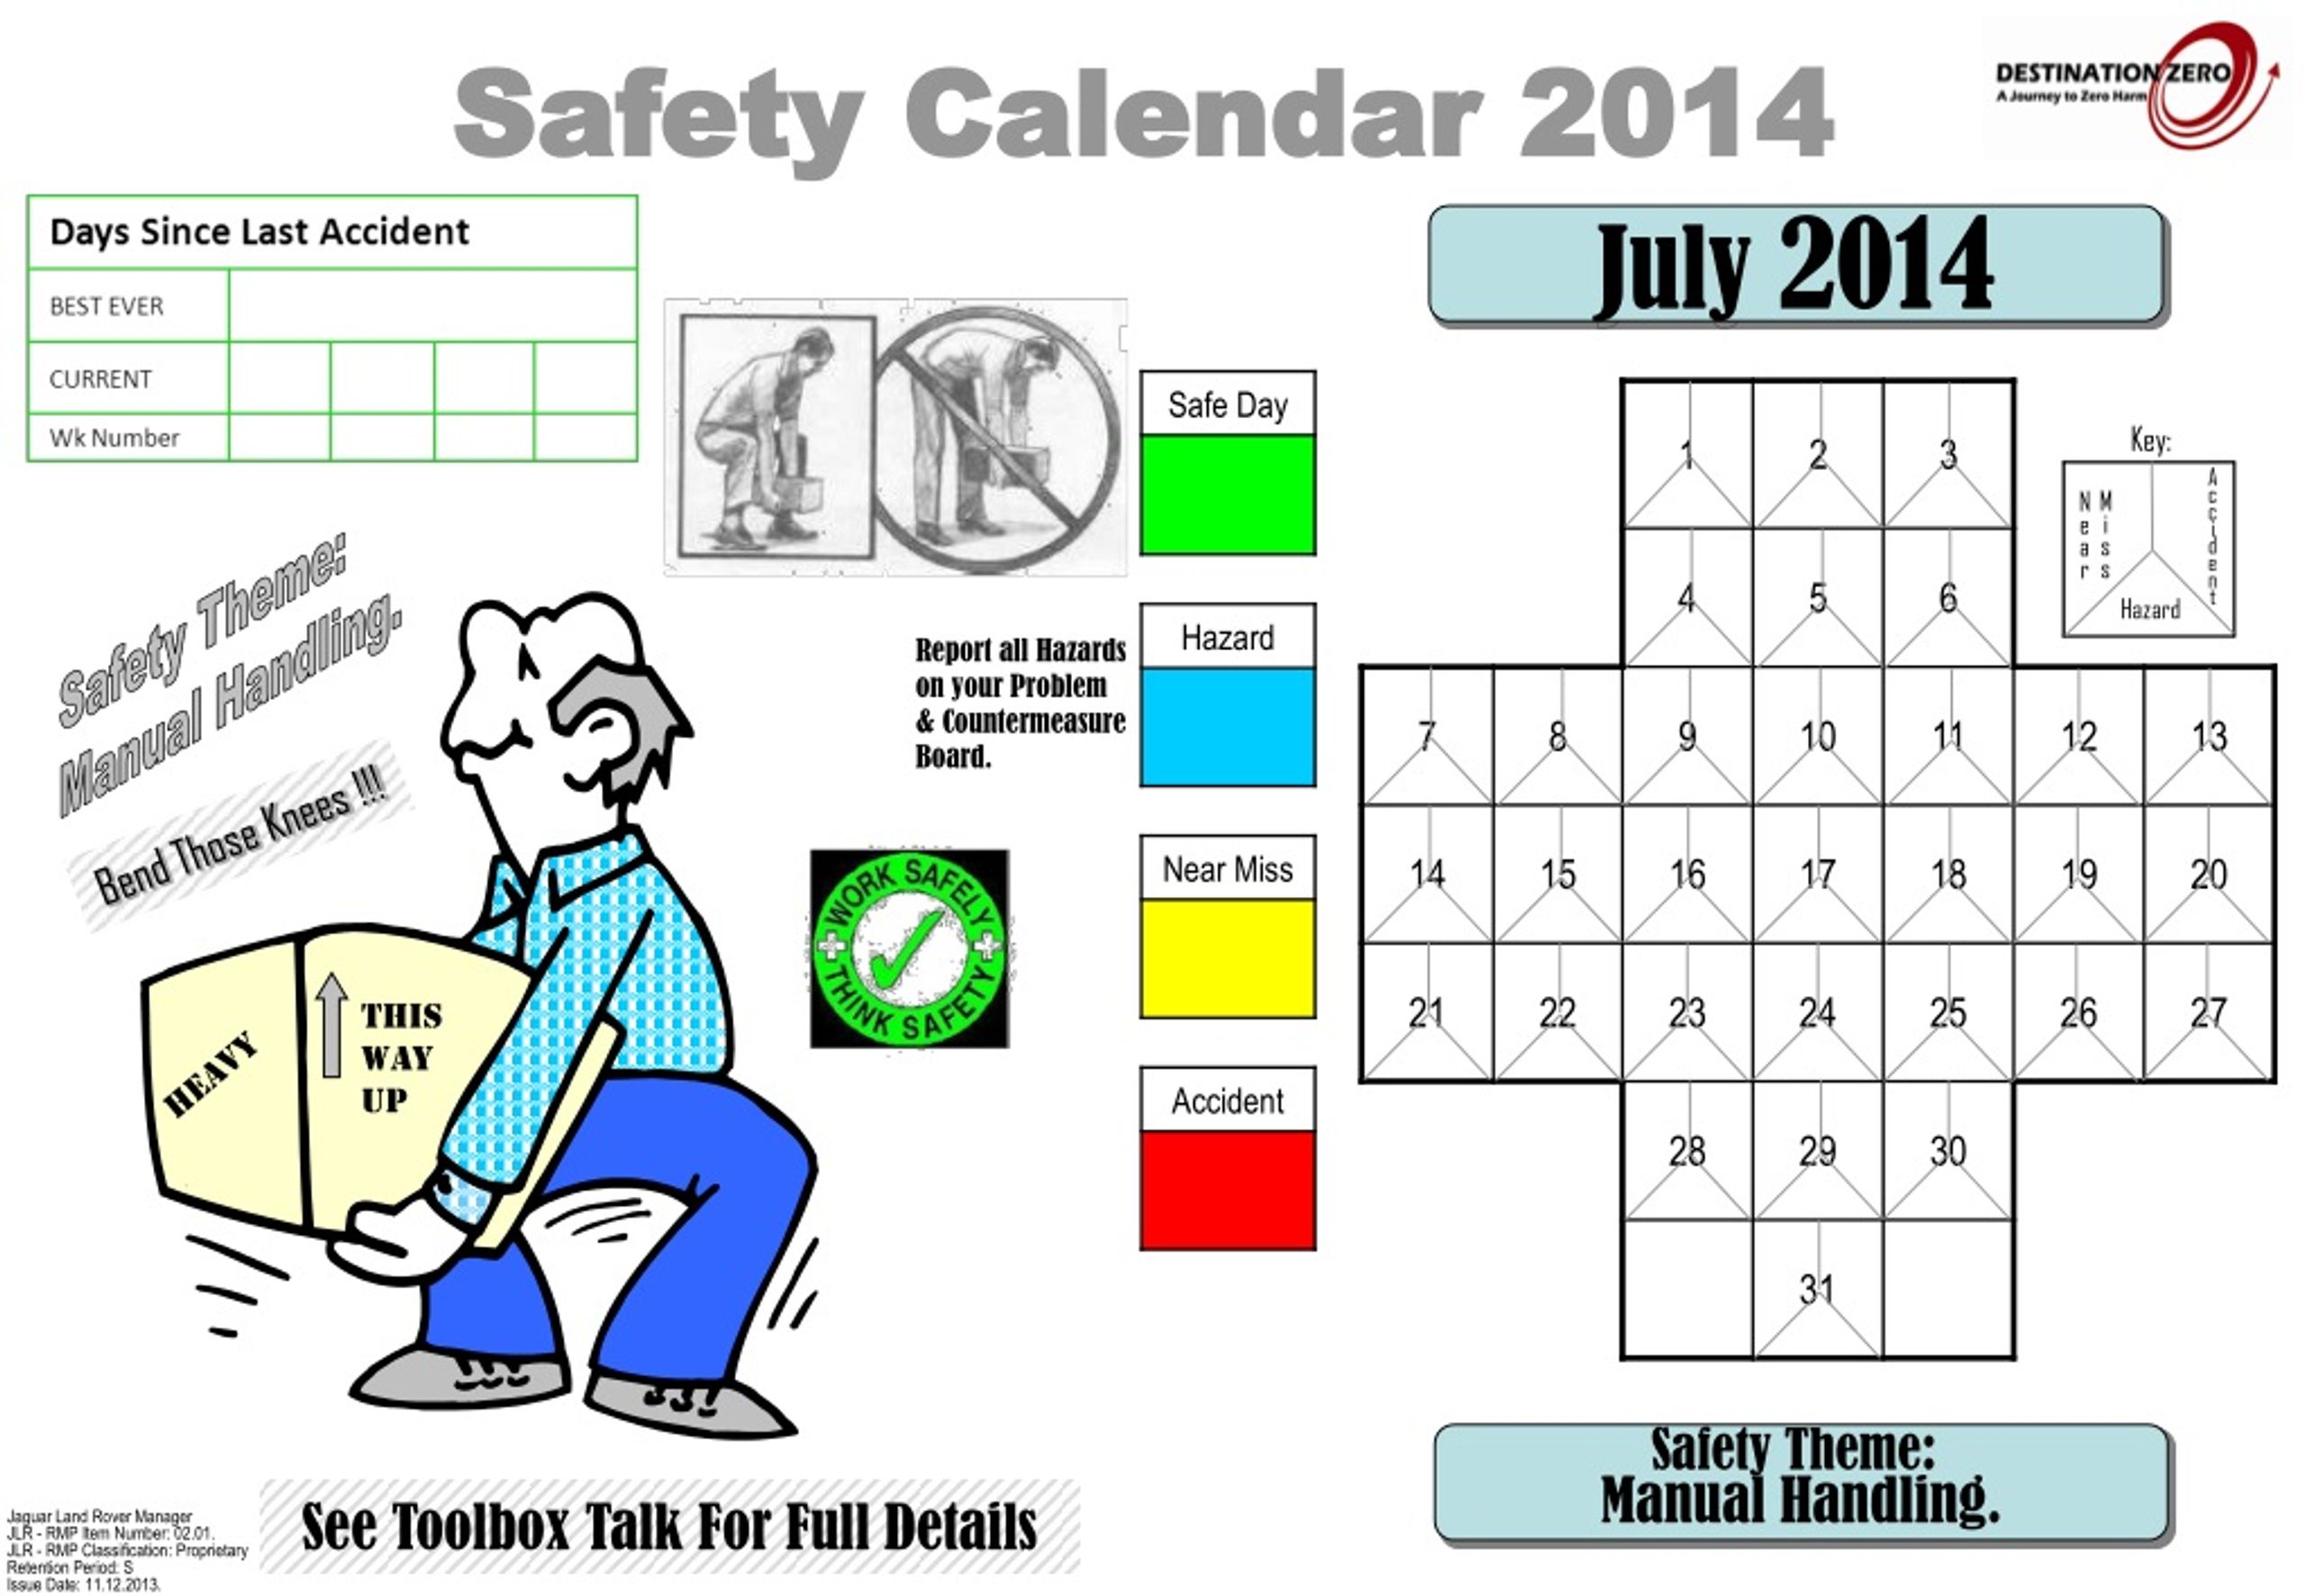 PPT Safety Calendar 2014 PowerPoint Presentation, free download ID